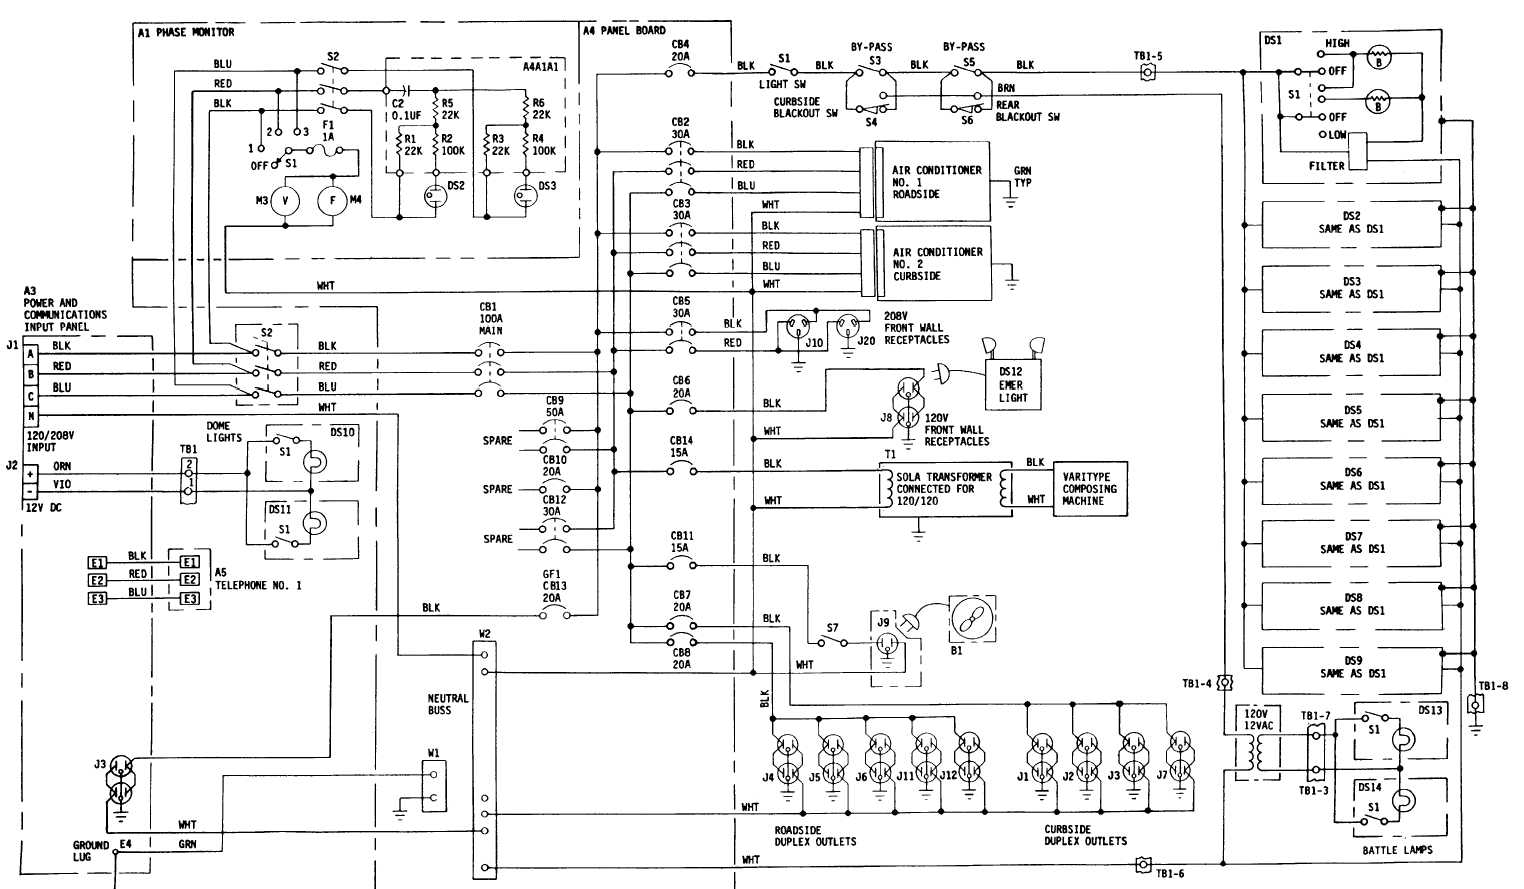 Drafting Support Section Electrical Schematic